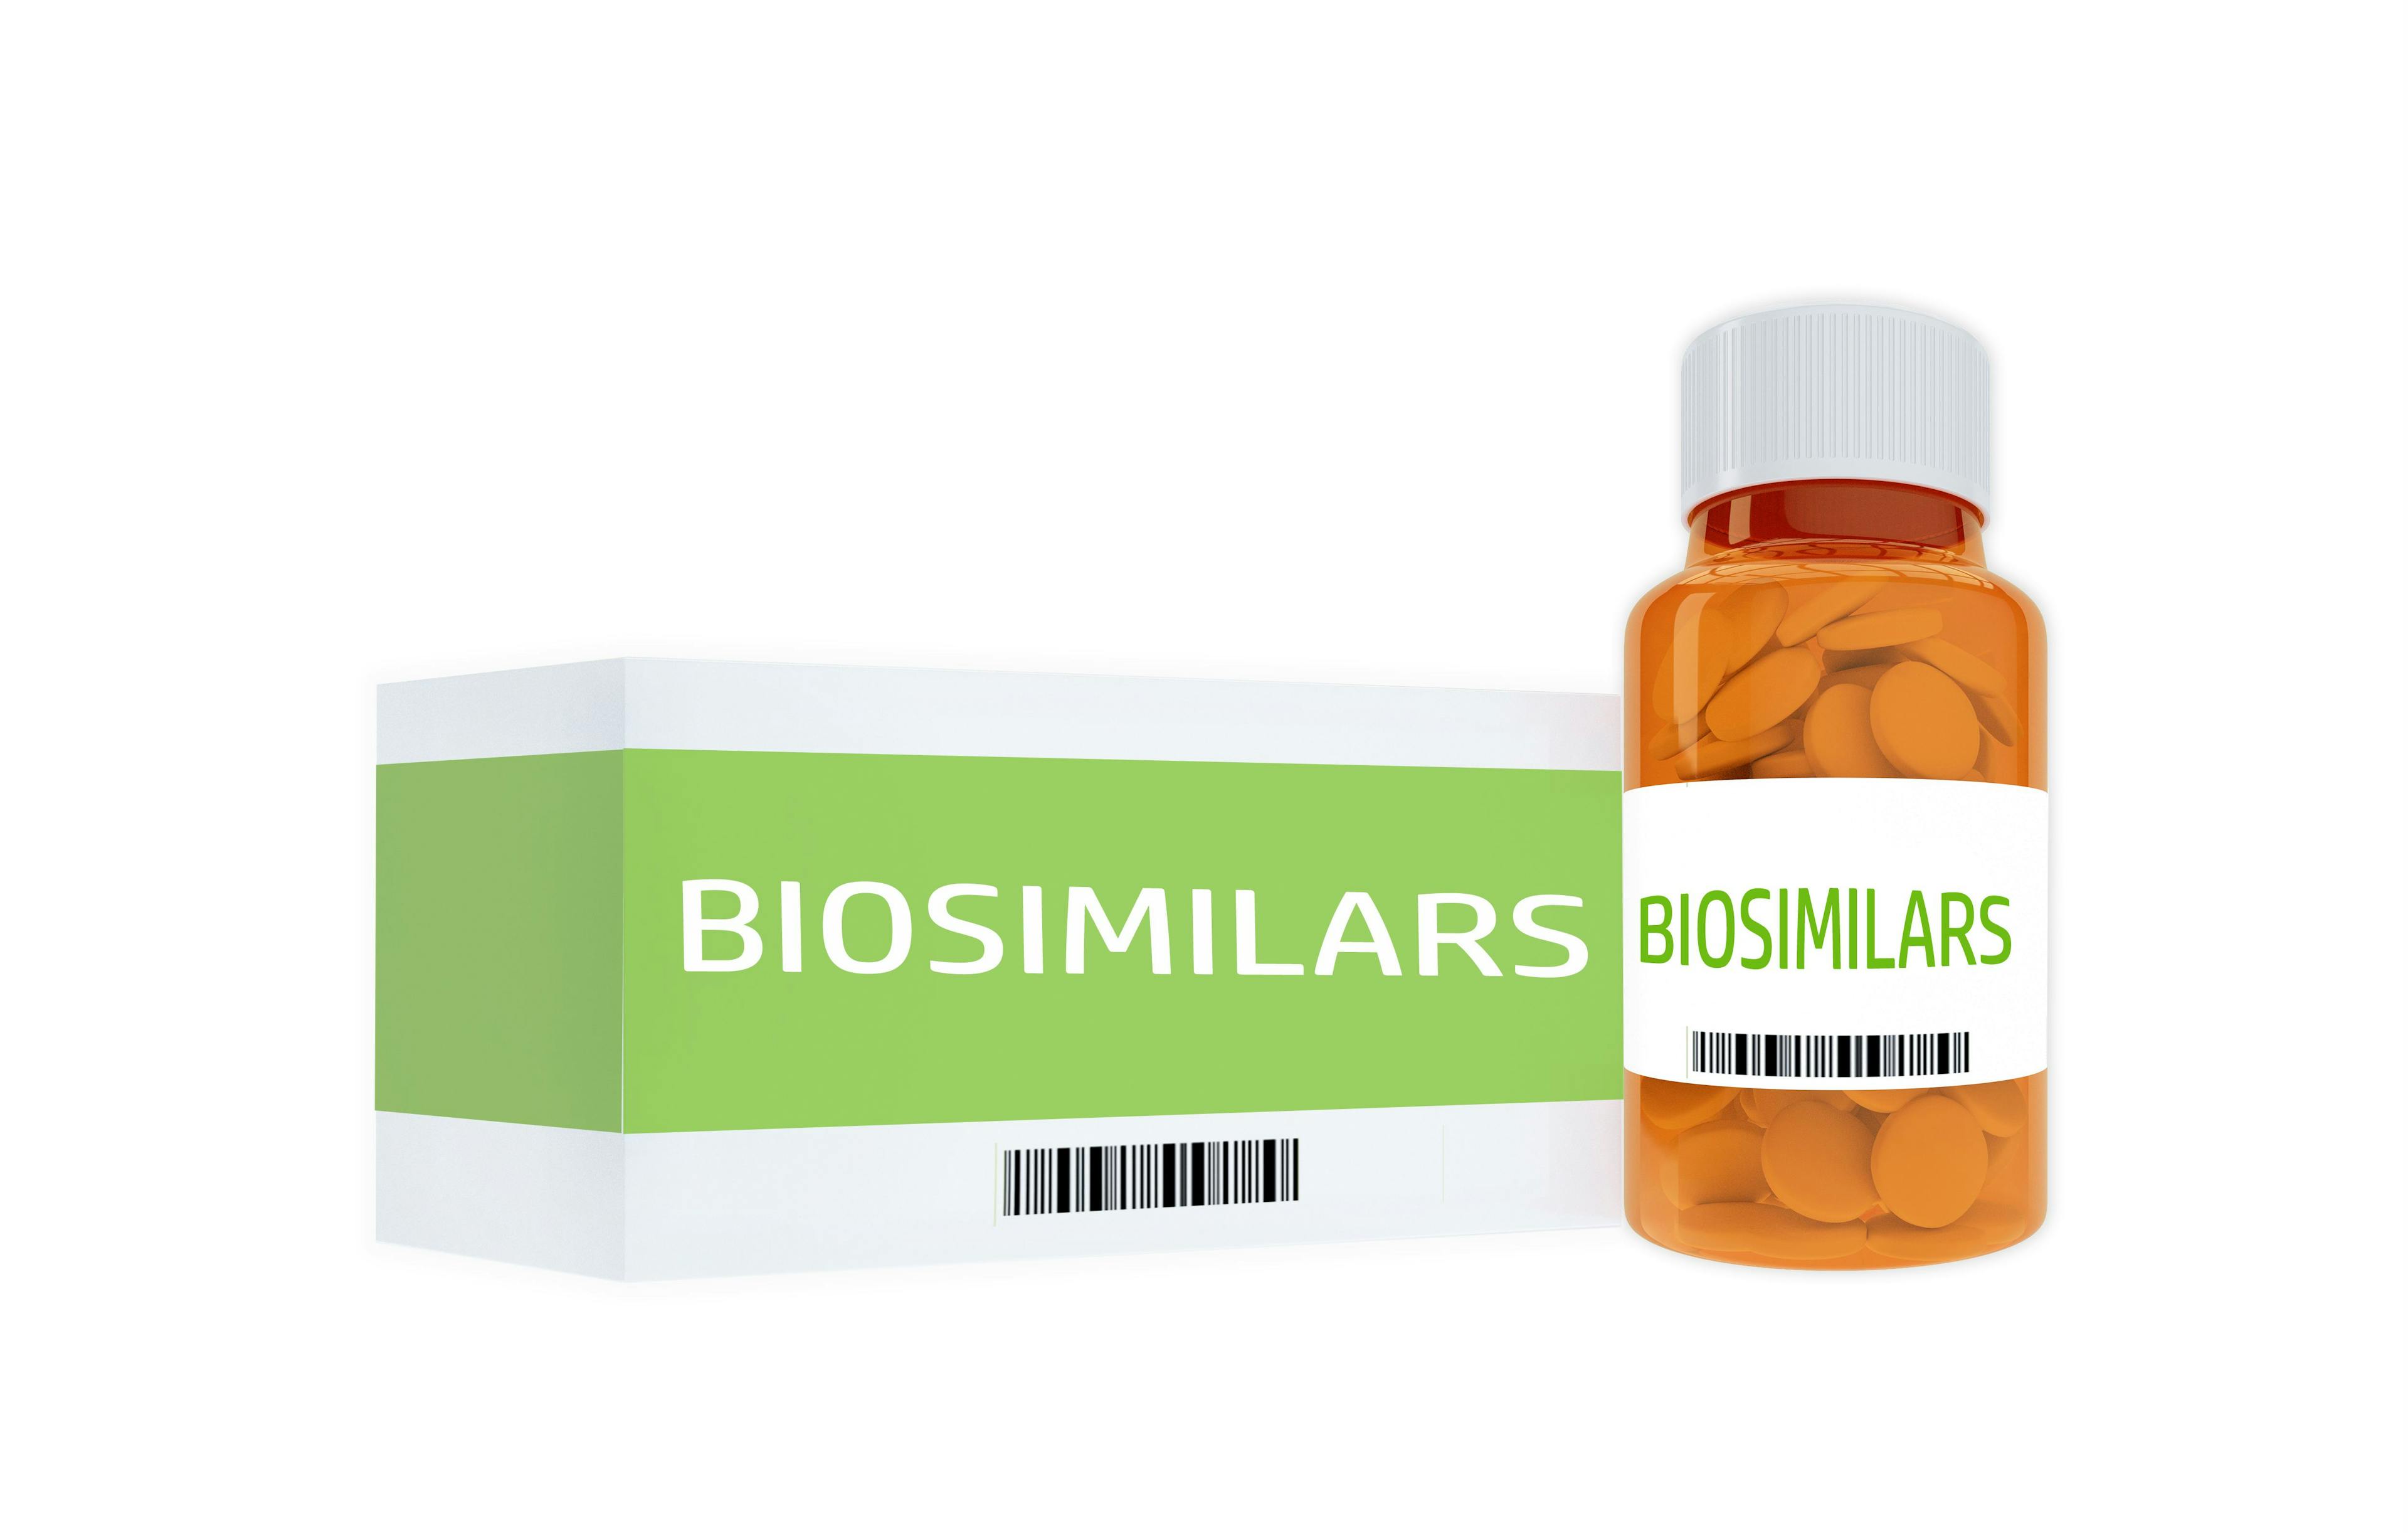 What’s Next for the Biosimilars Market in the U.S.?